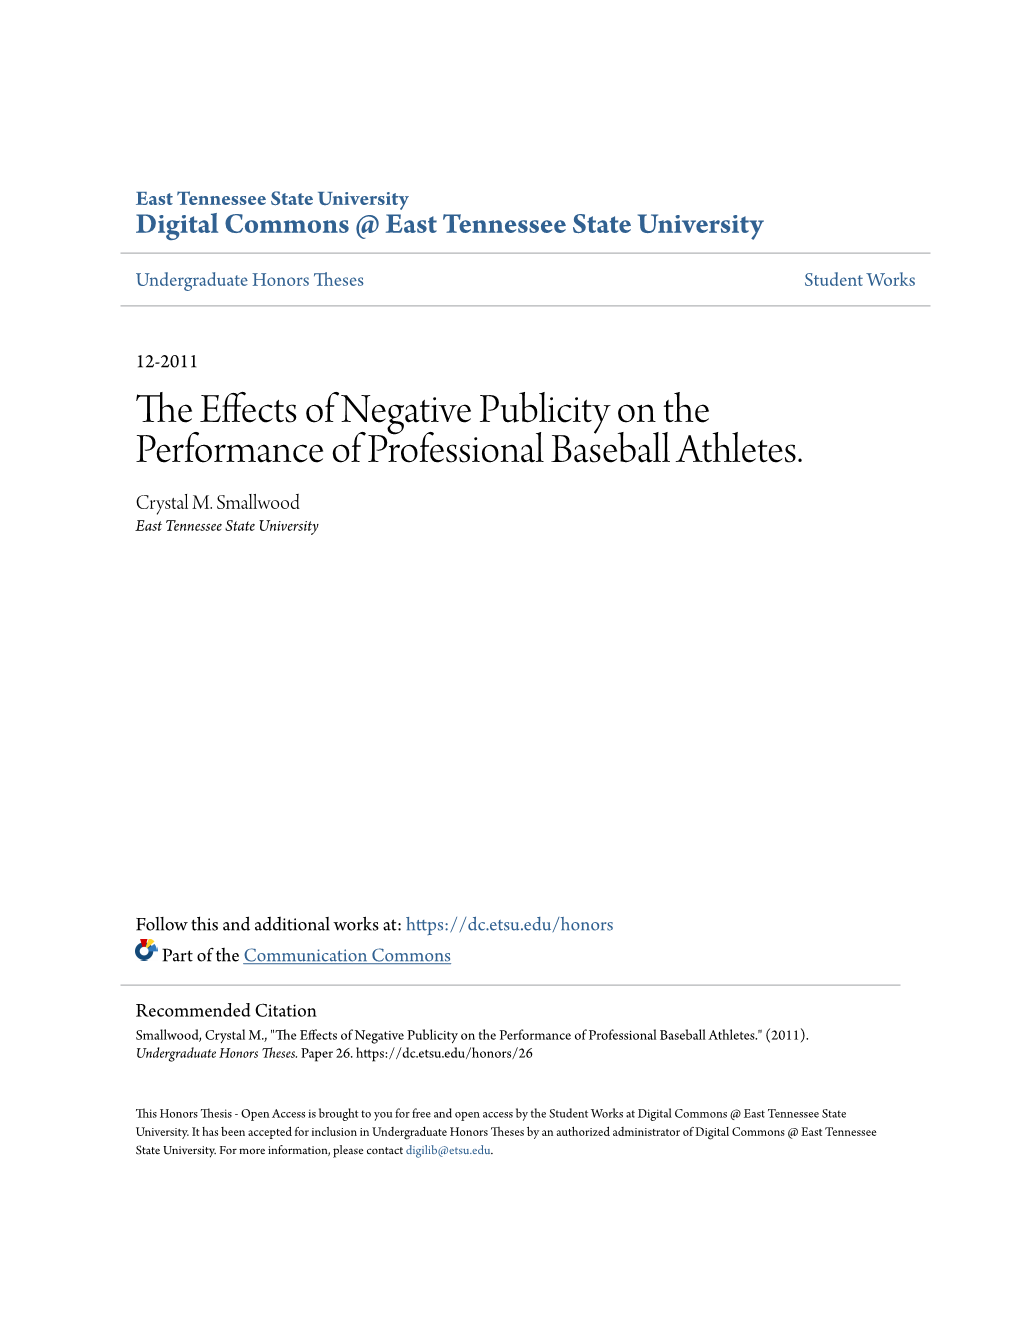 The Effects of Negative Publicity on the Performance of Professional Baseball Athletes." (2011)